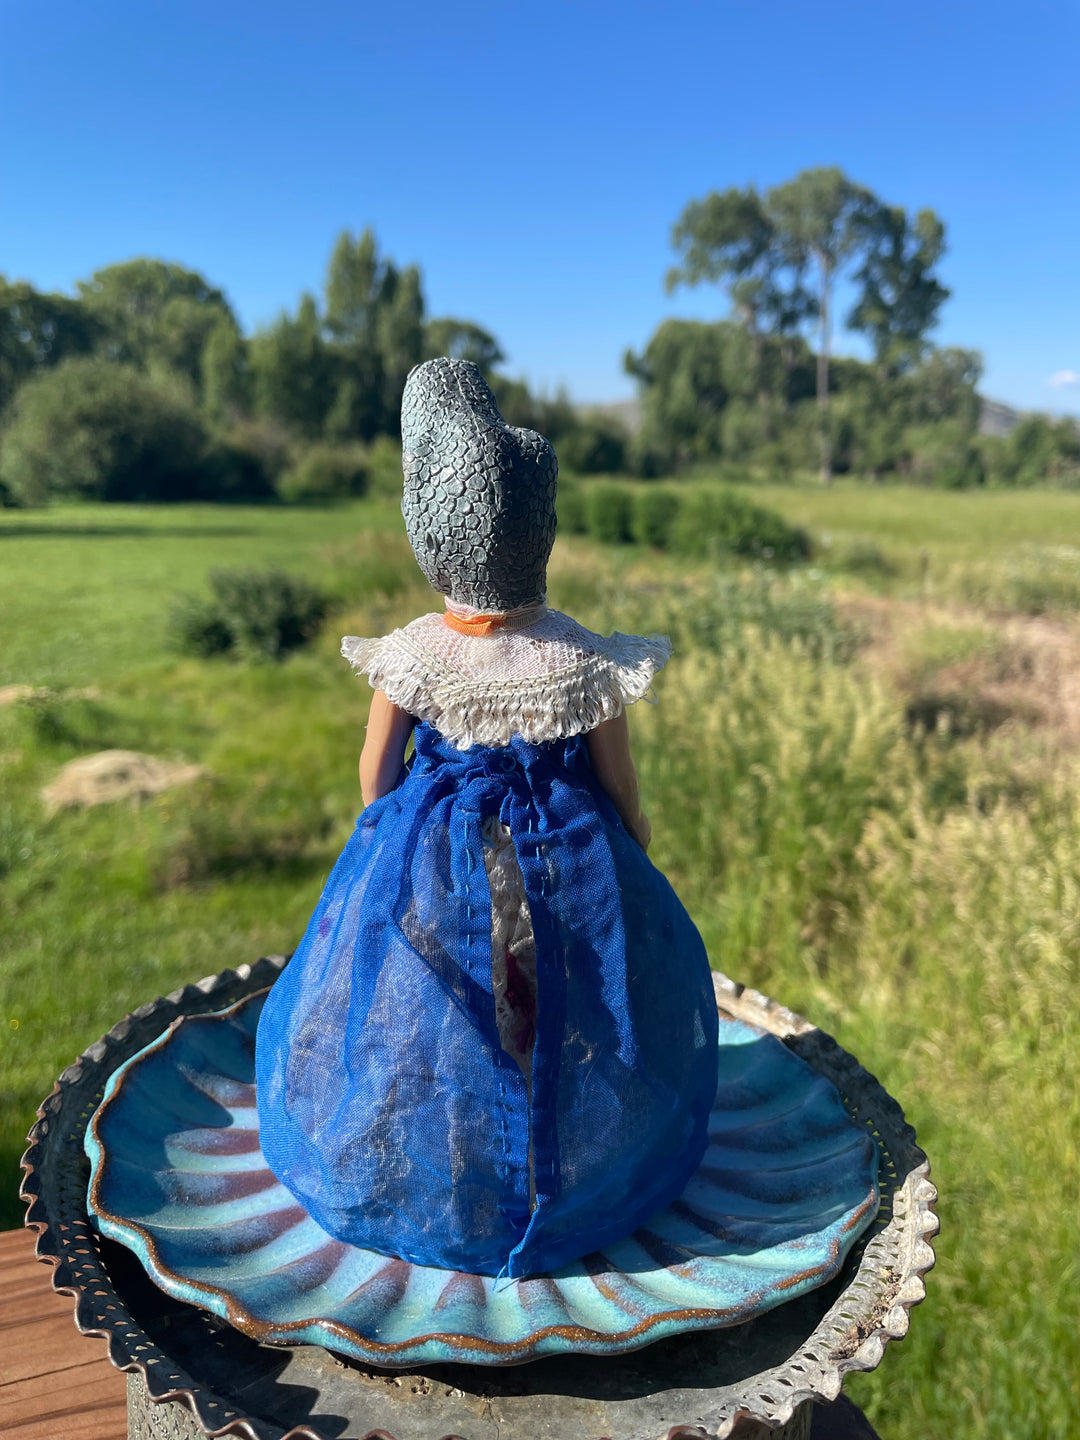 Backside, Vintage toy doll with a dinosaur head. Hand dyed blue gauze skirt over a lace pinafore with a lace bib collar. 6" tall x 3" wide.